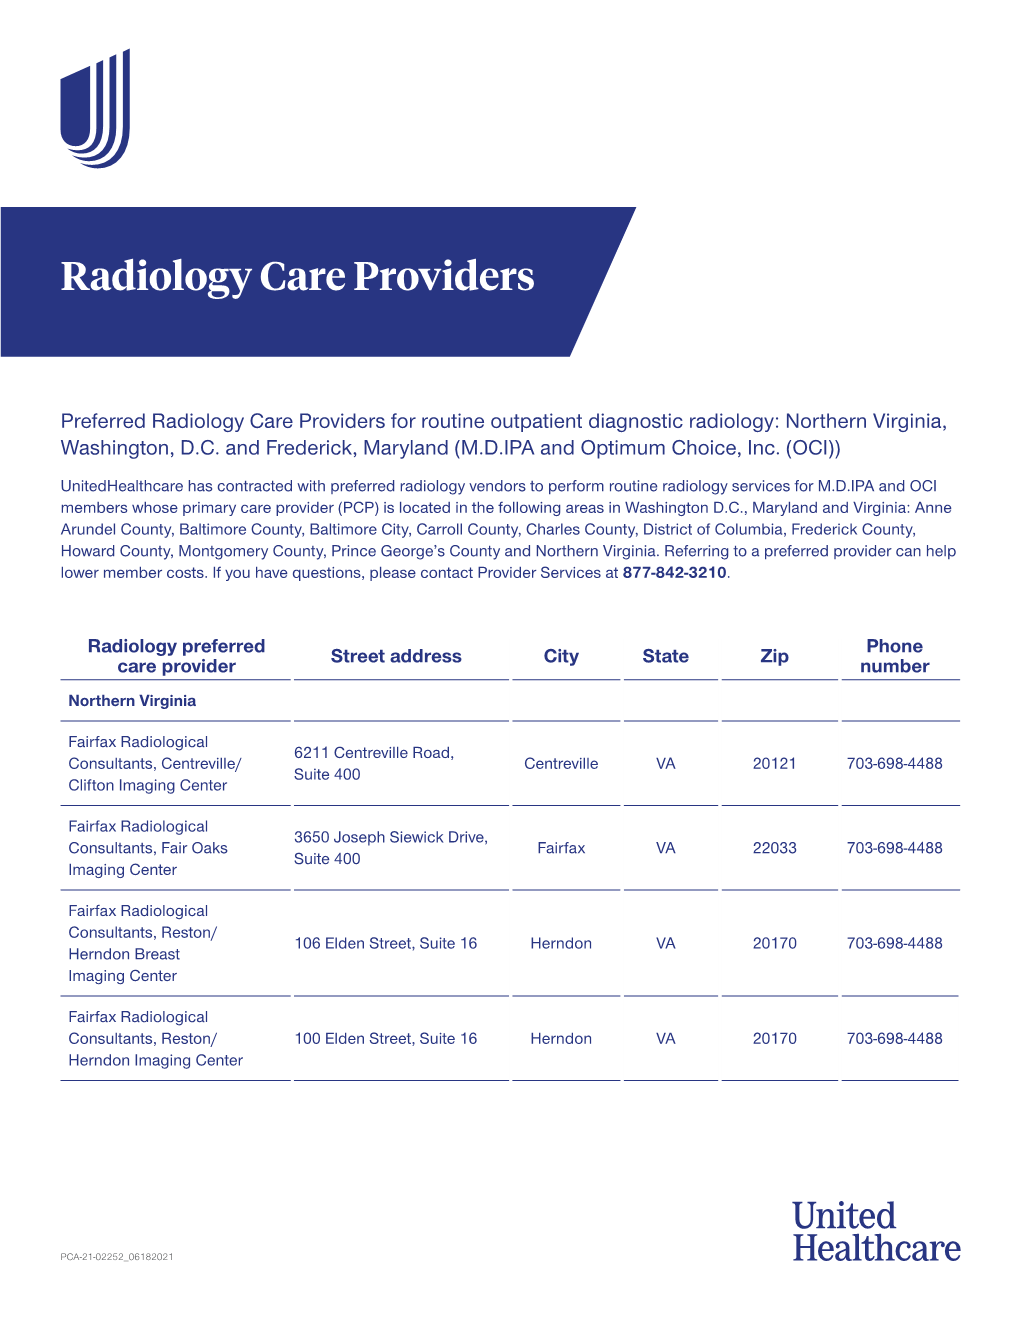 Preferred Radiology Care Providers for Routine Outpatient Diagnostic Radiology: Northern Virginia, Washington, D.C